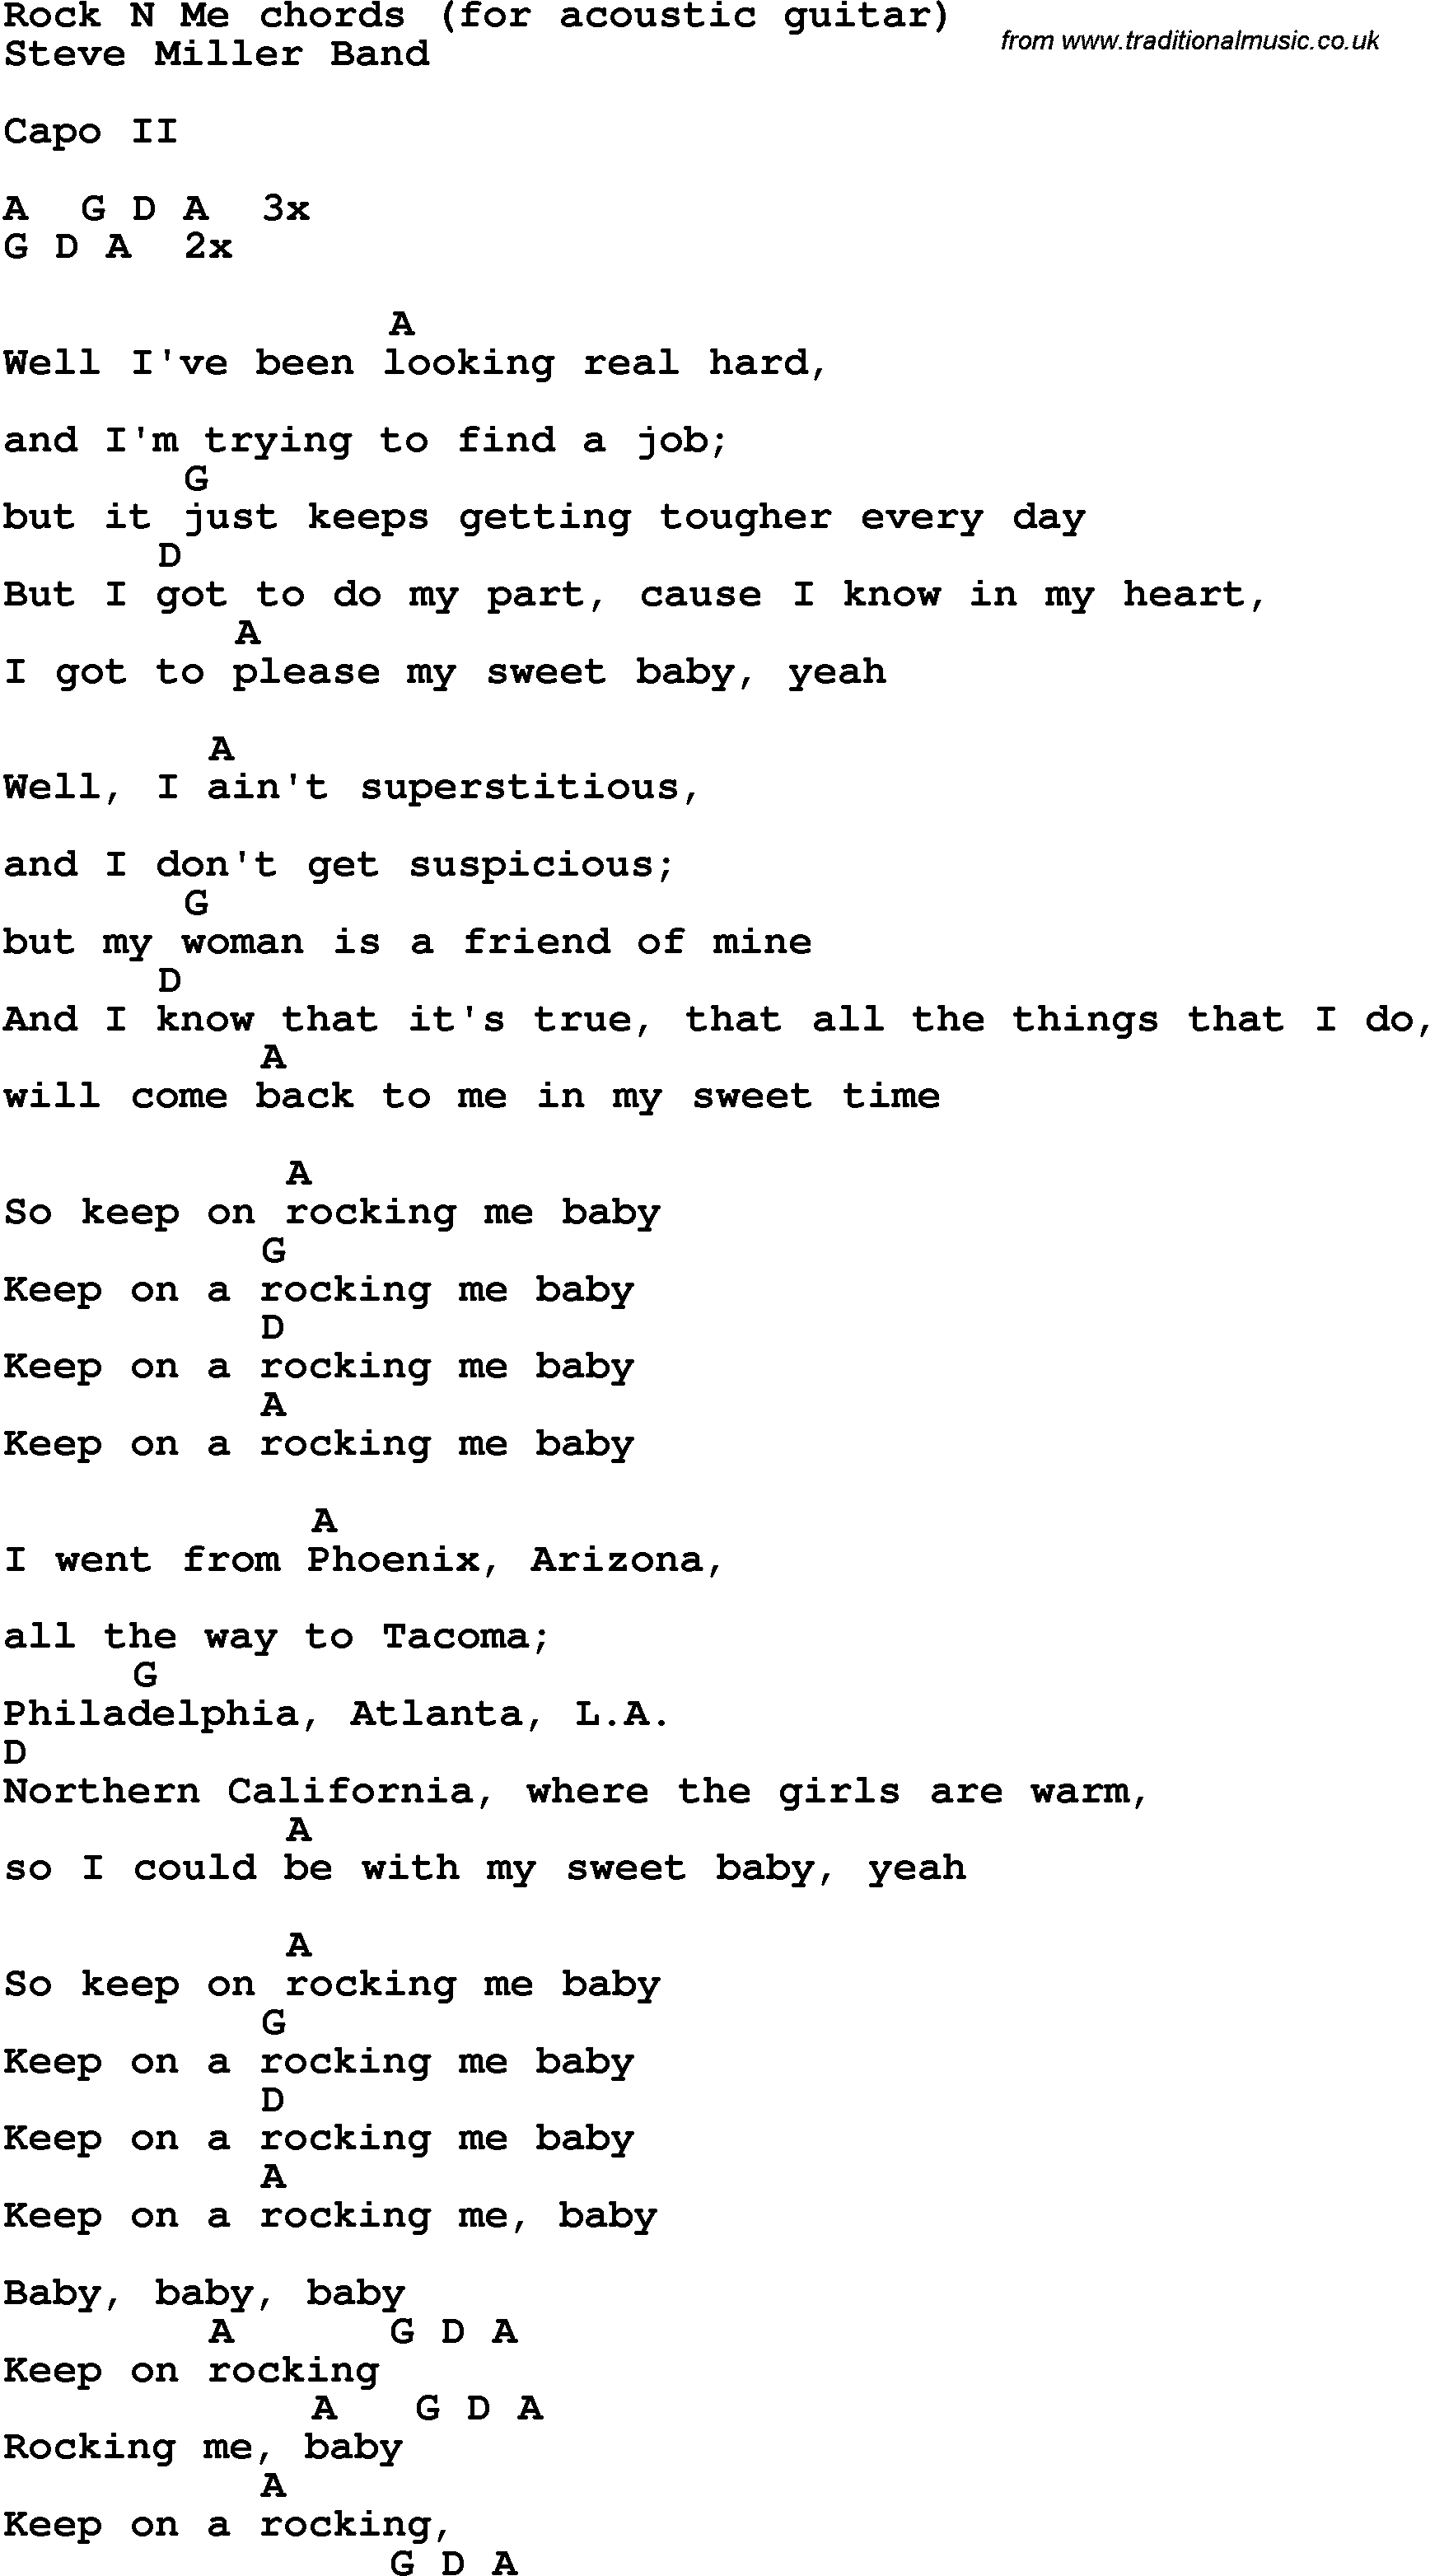 Song Lyrics with guitar chords for Rock'n Mee